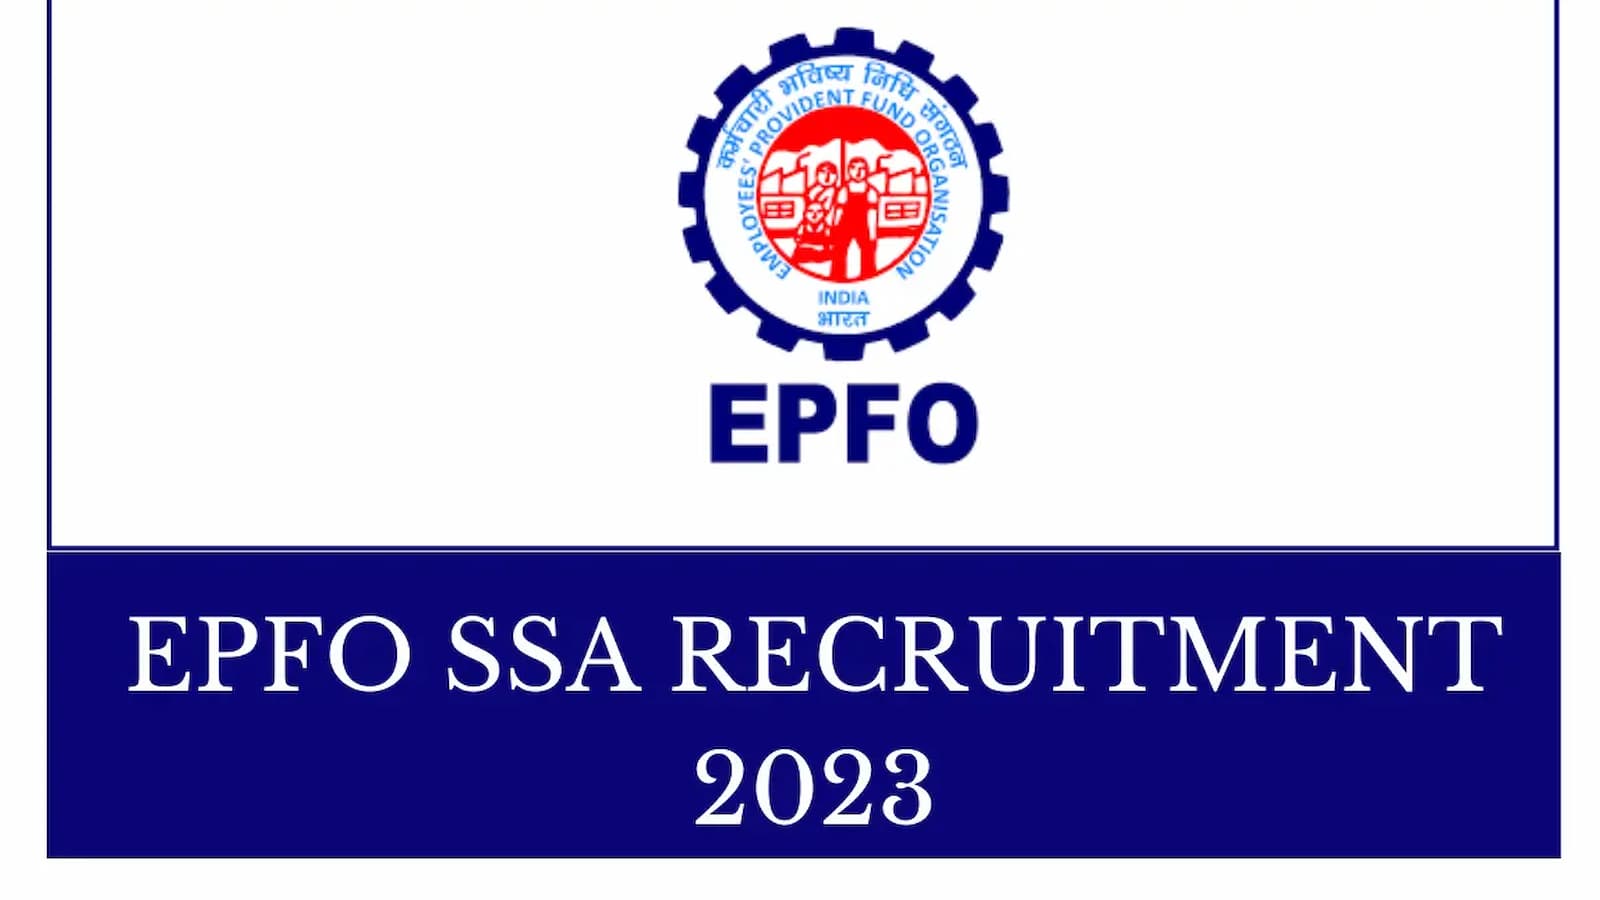 EPFO SSA Score Card 2023 Released 2,674 Vacancies to be Filled